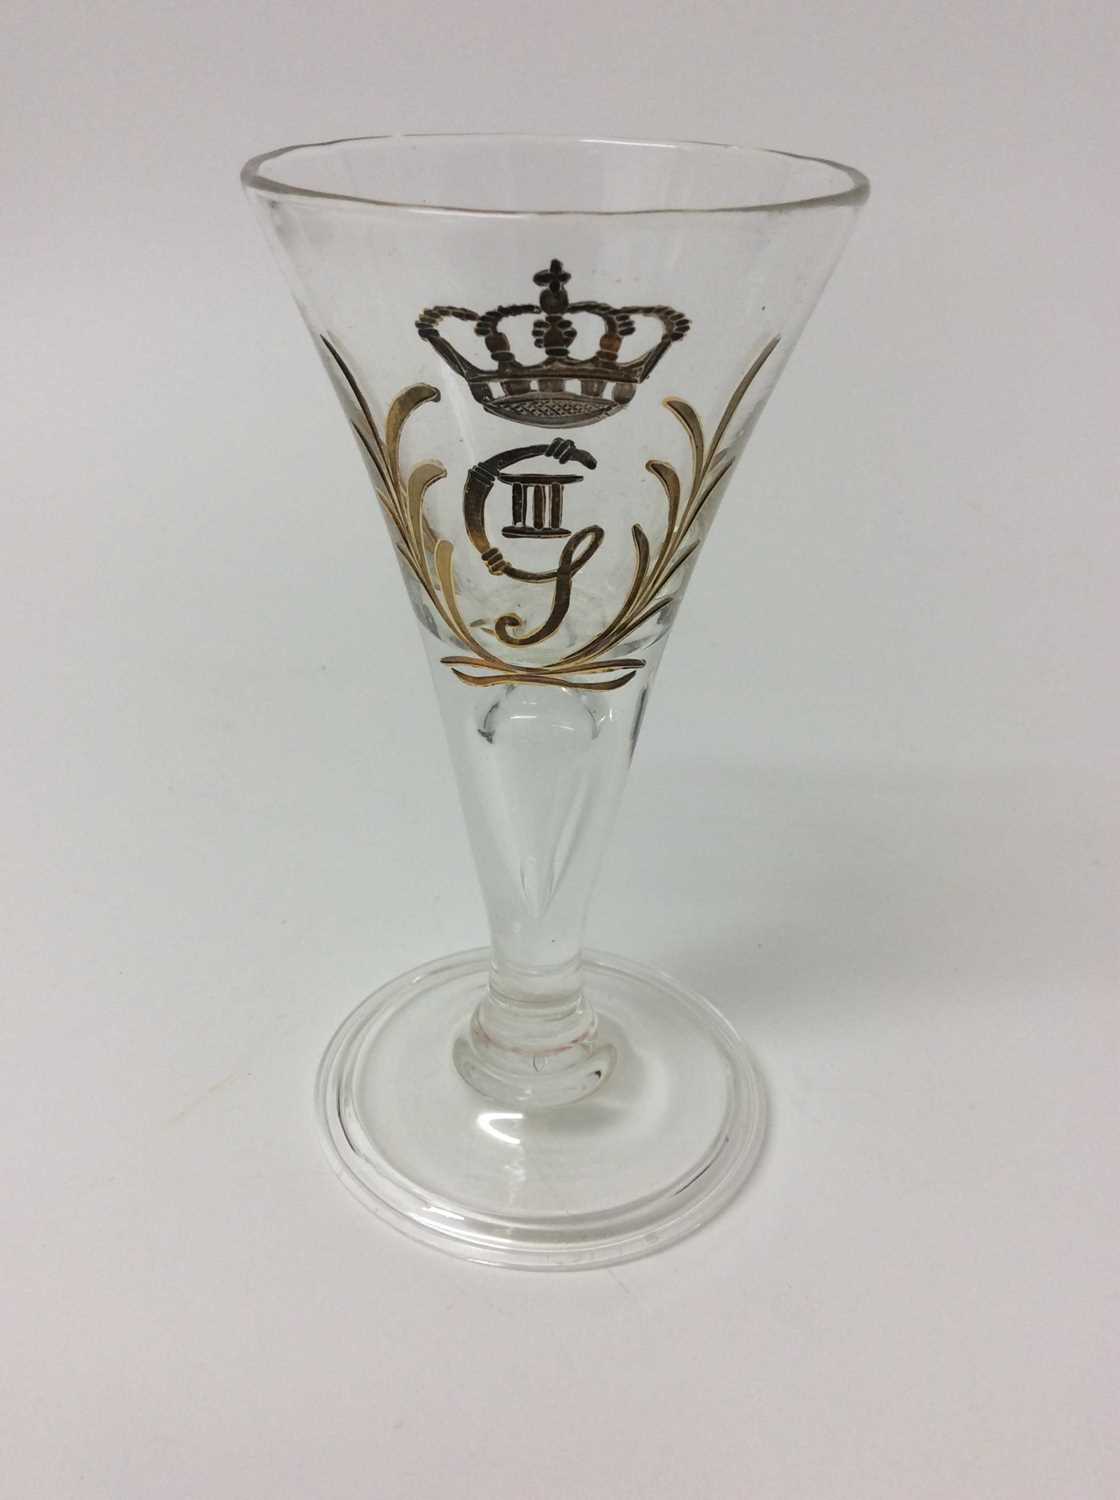 Lot 9 - Eighteenth century -style wine glass boldly engraved and gilded with the cipher of King Gustav III of Sweden , of trumpet form with air bubble to stem raised on bell-shaped folded foot 16 cm high